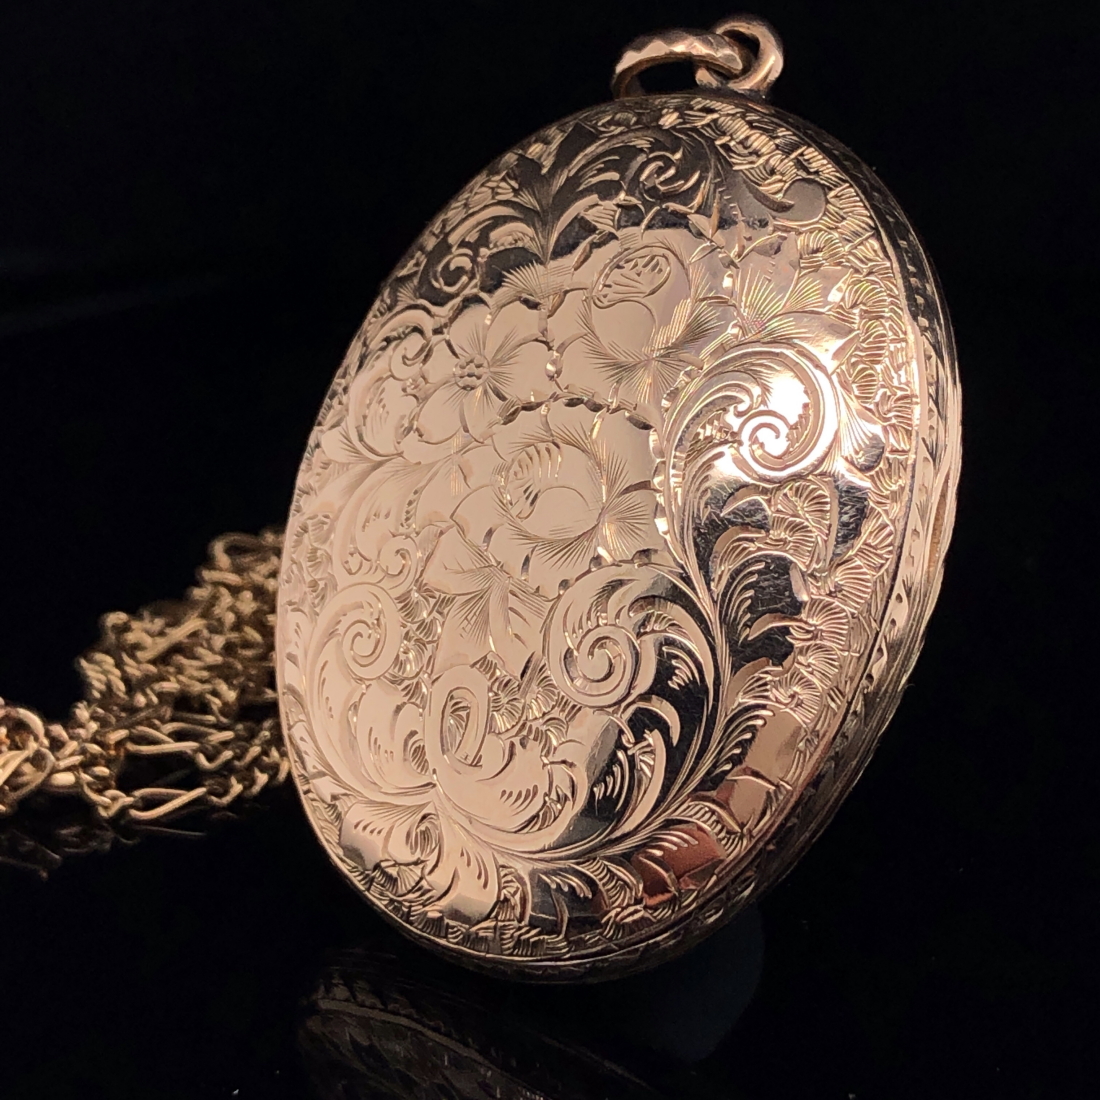 A 9ct GOLD SCROLL ENGRAVED OVAL LOCKET SUSPENDED ON A 9ct GOLD FIGARO STYLE CHAIN. LOCKET